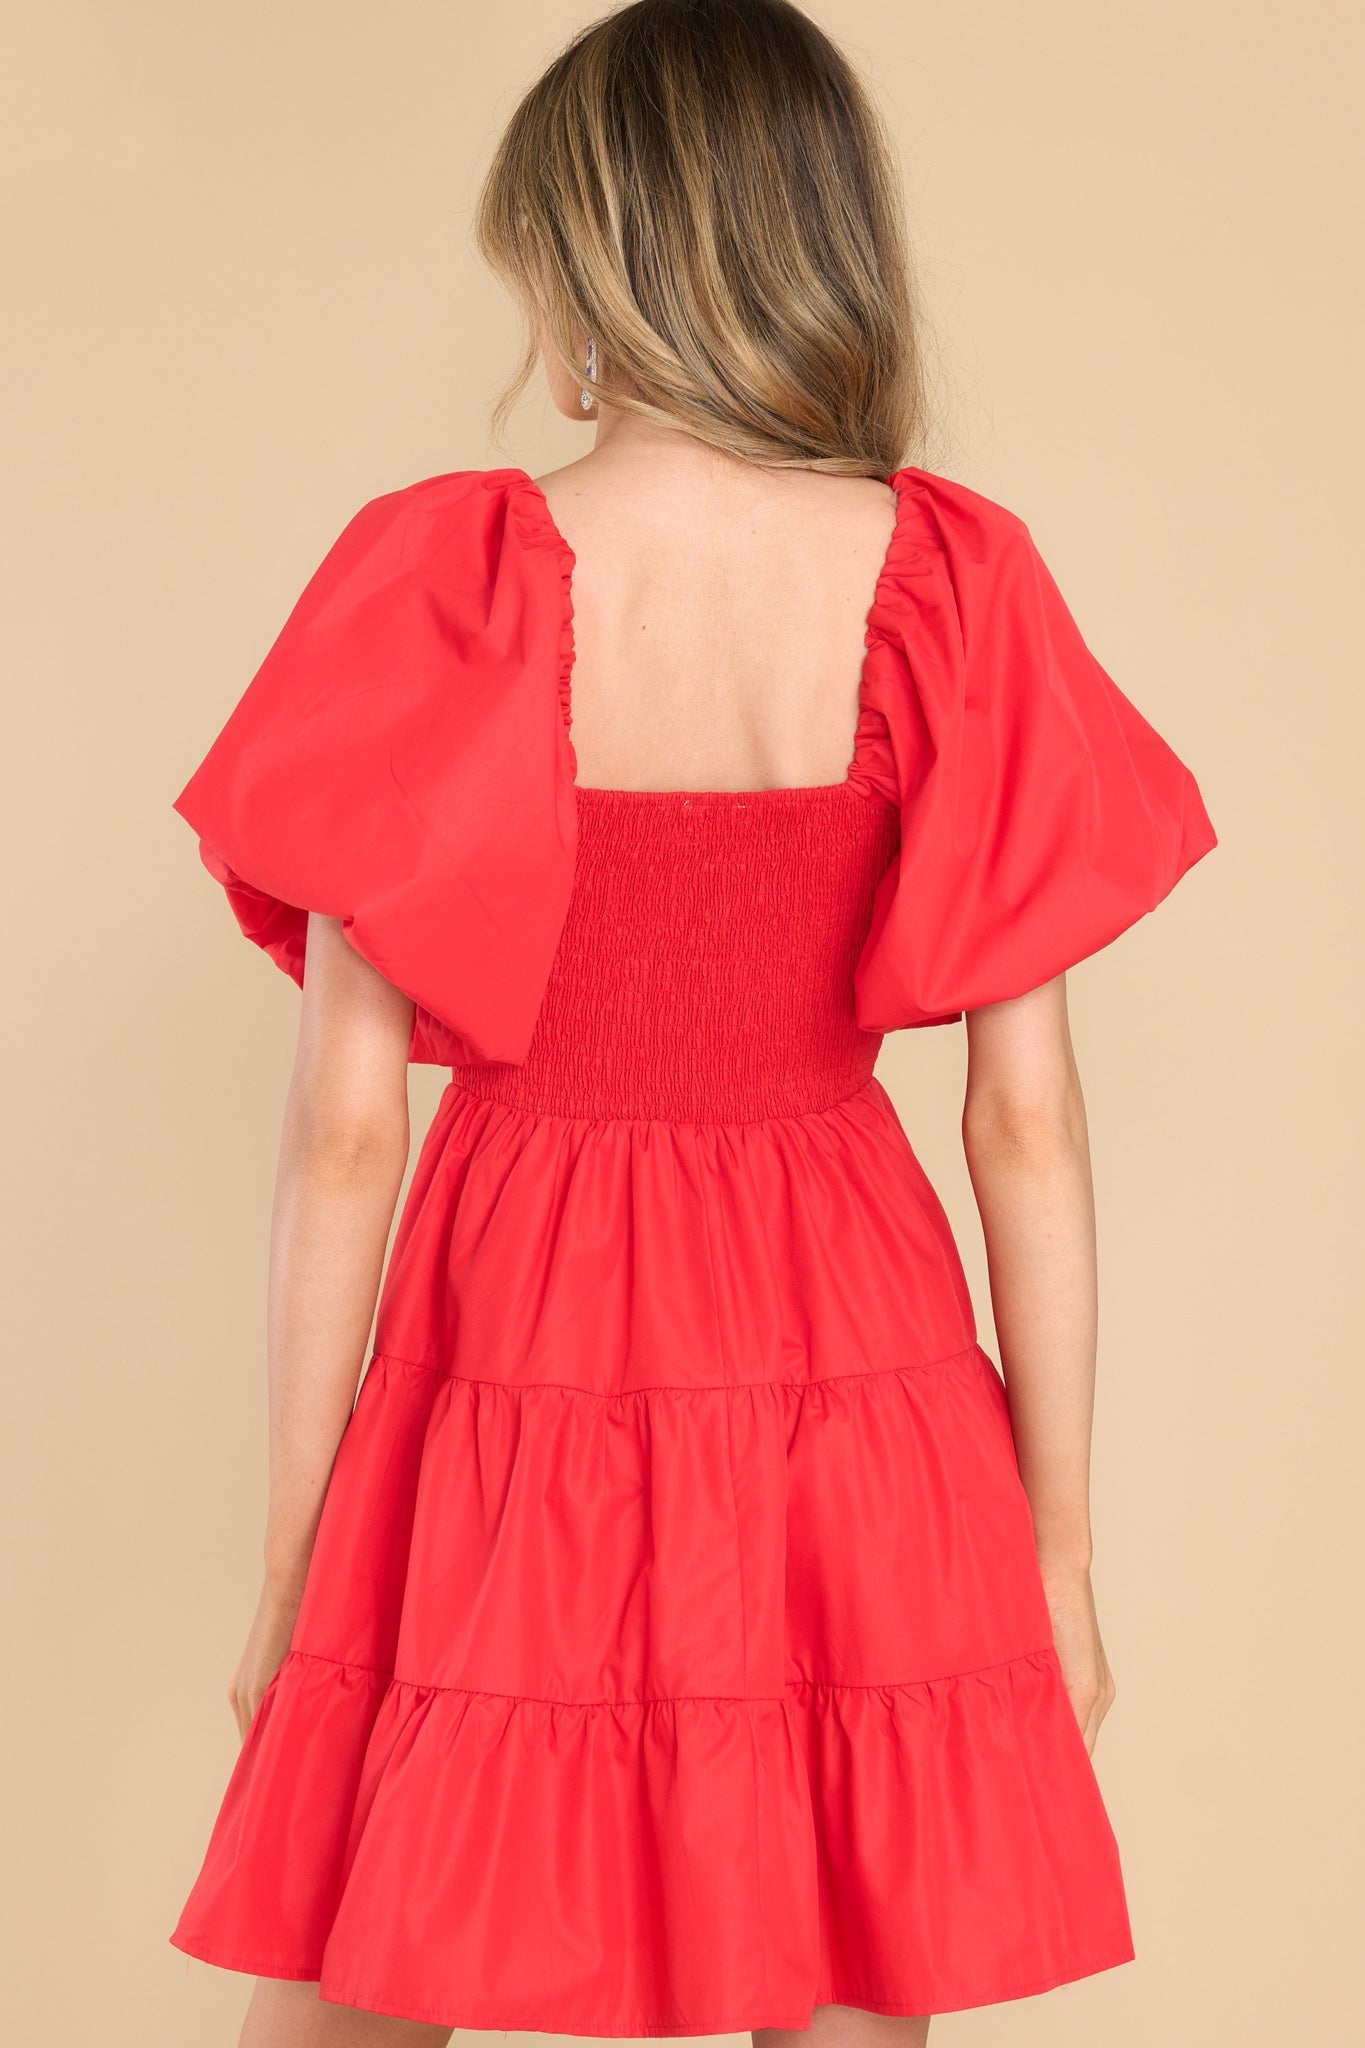 That Way Smocked Red Dress - Red Dress